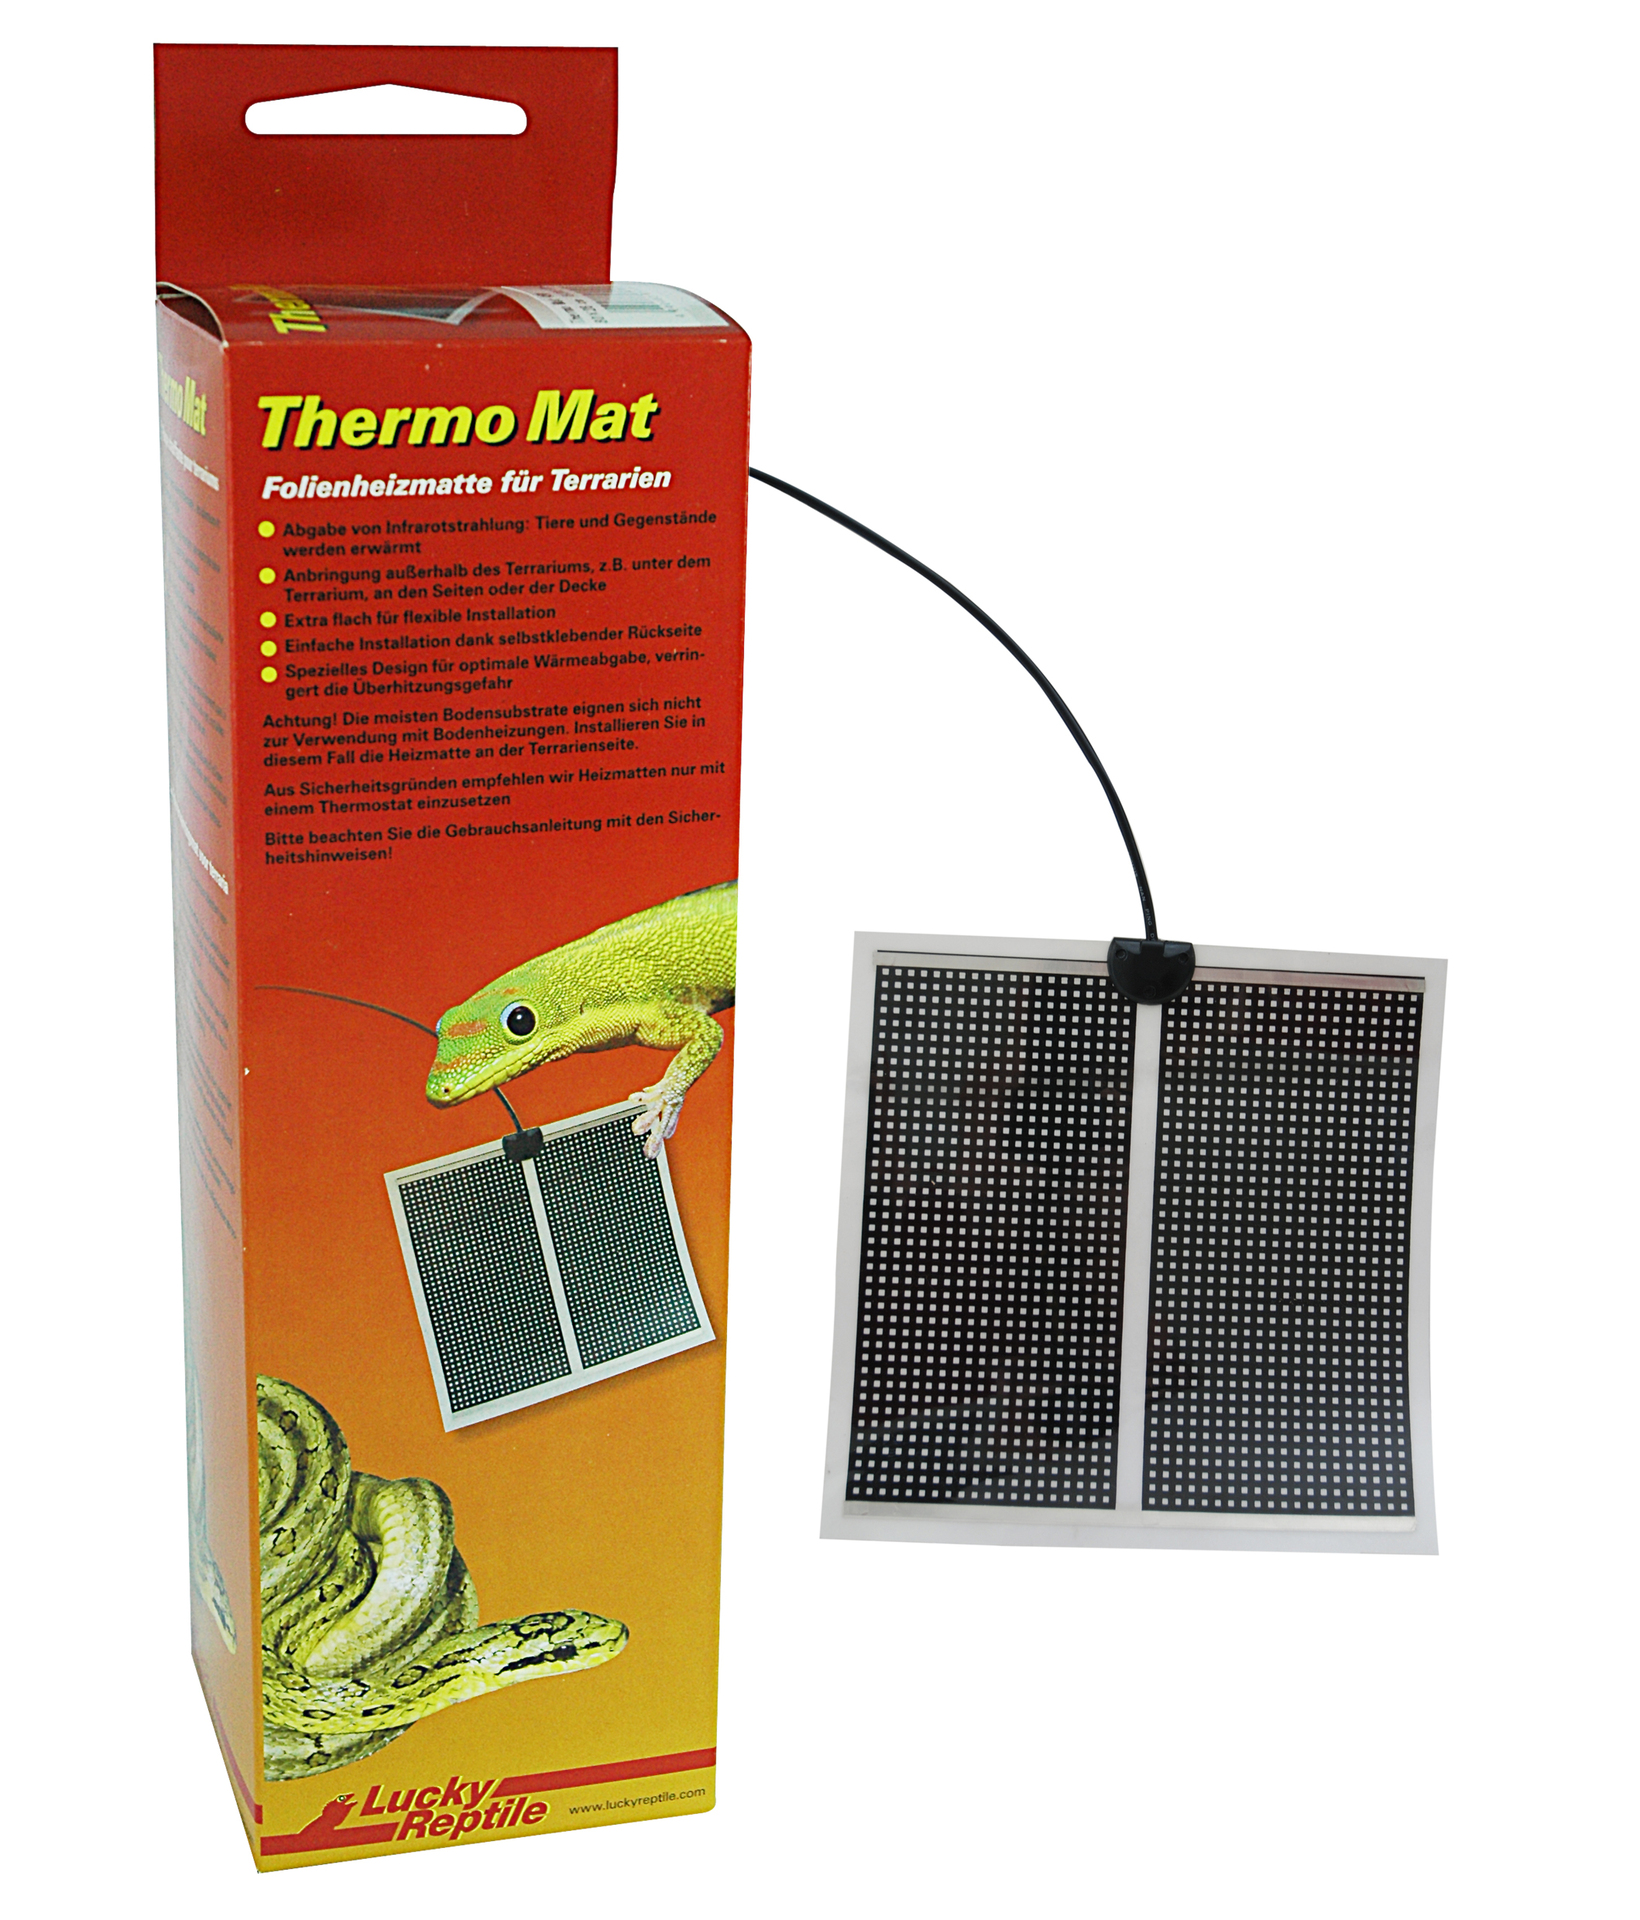 Import-Export Peter Hoch GmbH Thermo Mat